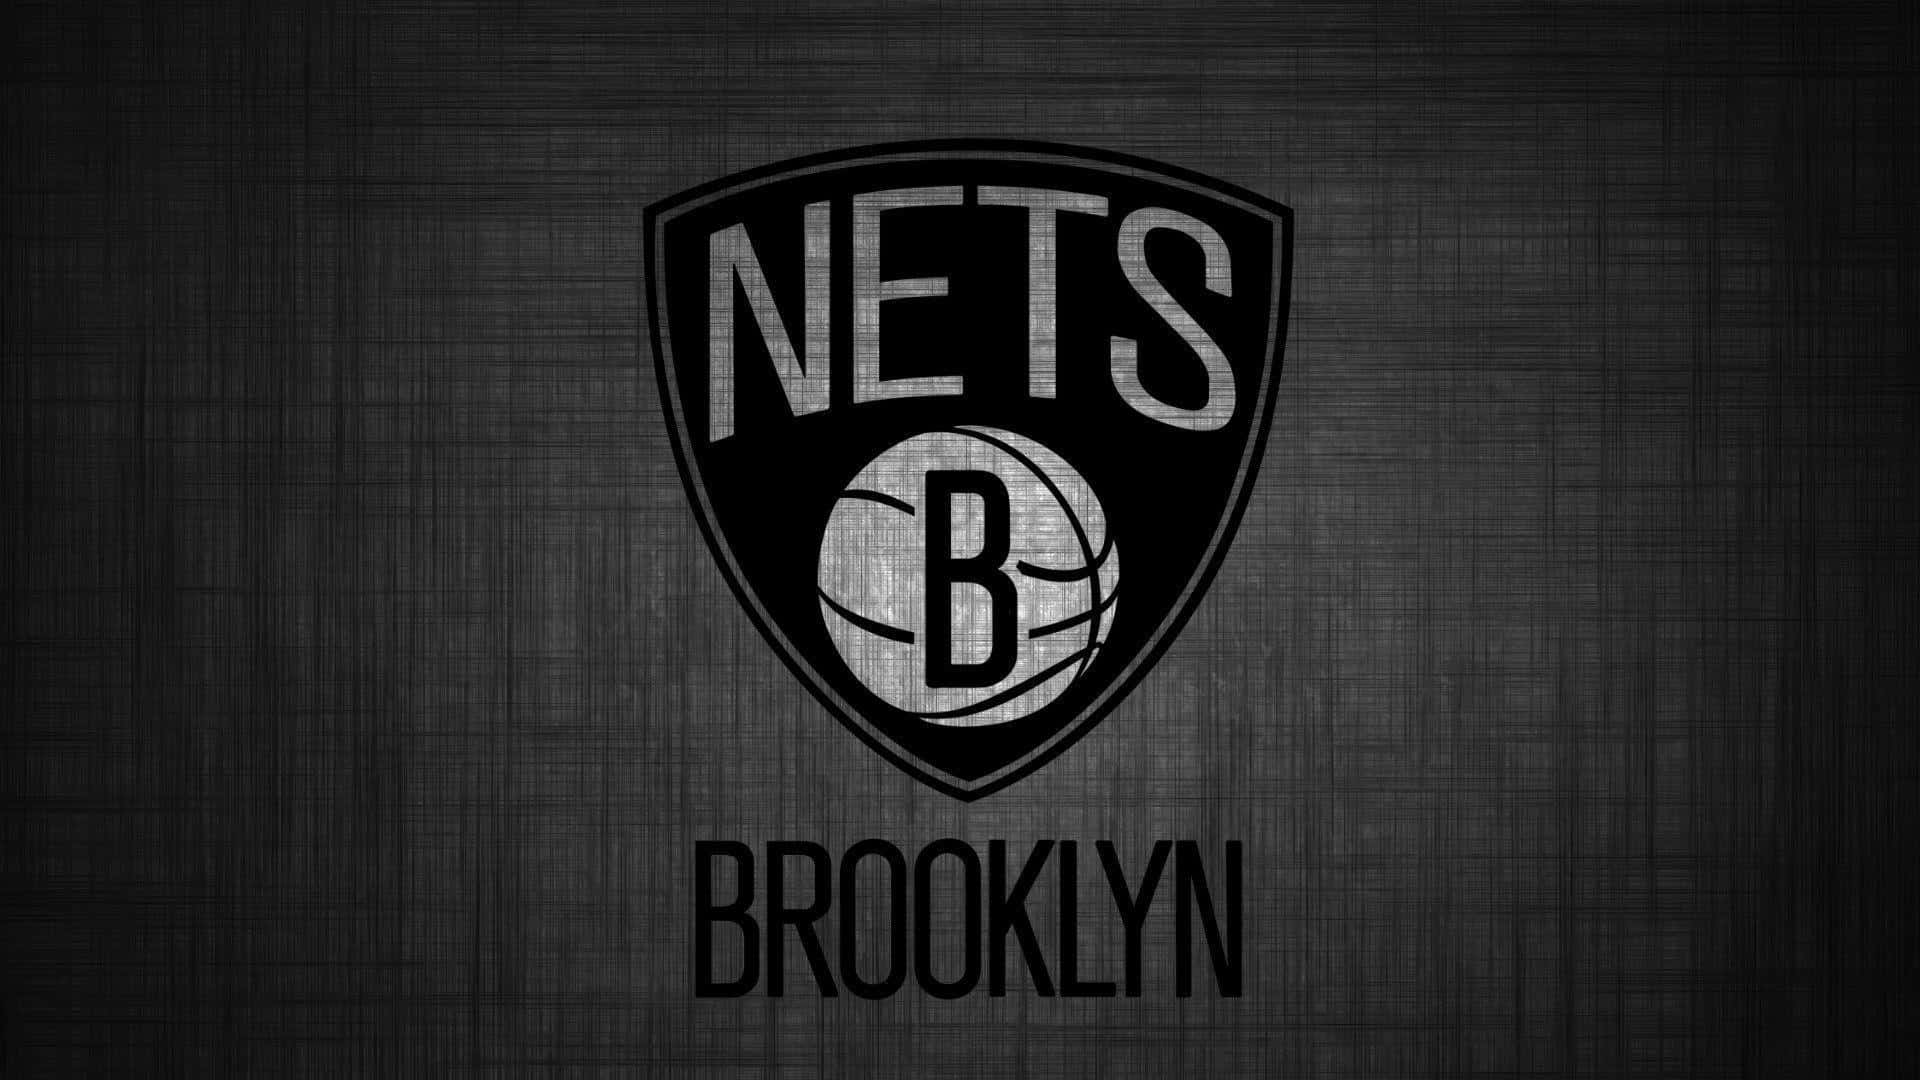 The Brooklyn Nets look to dominate the NBA in the 2019-20 season